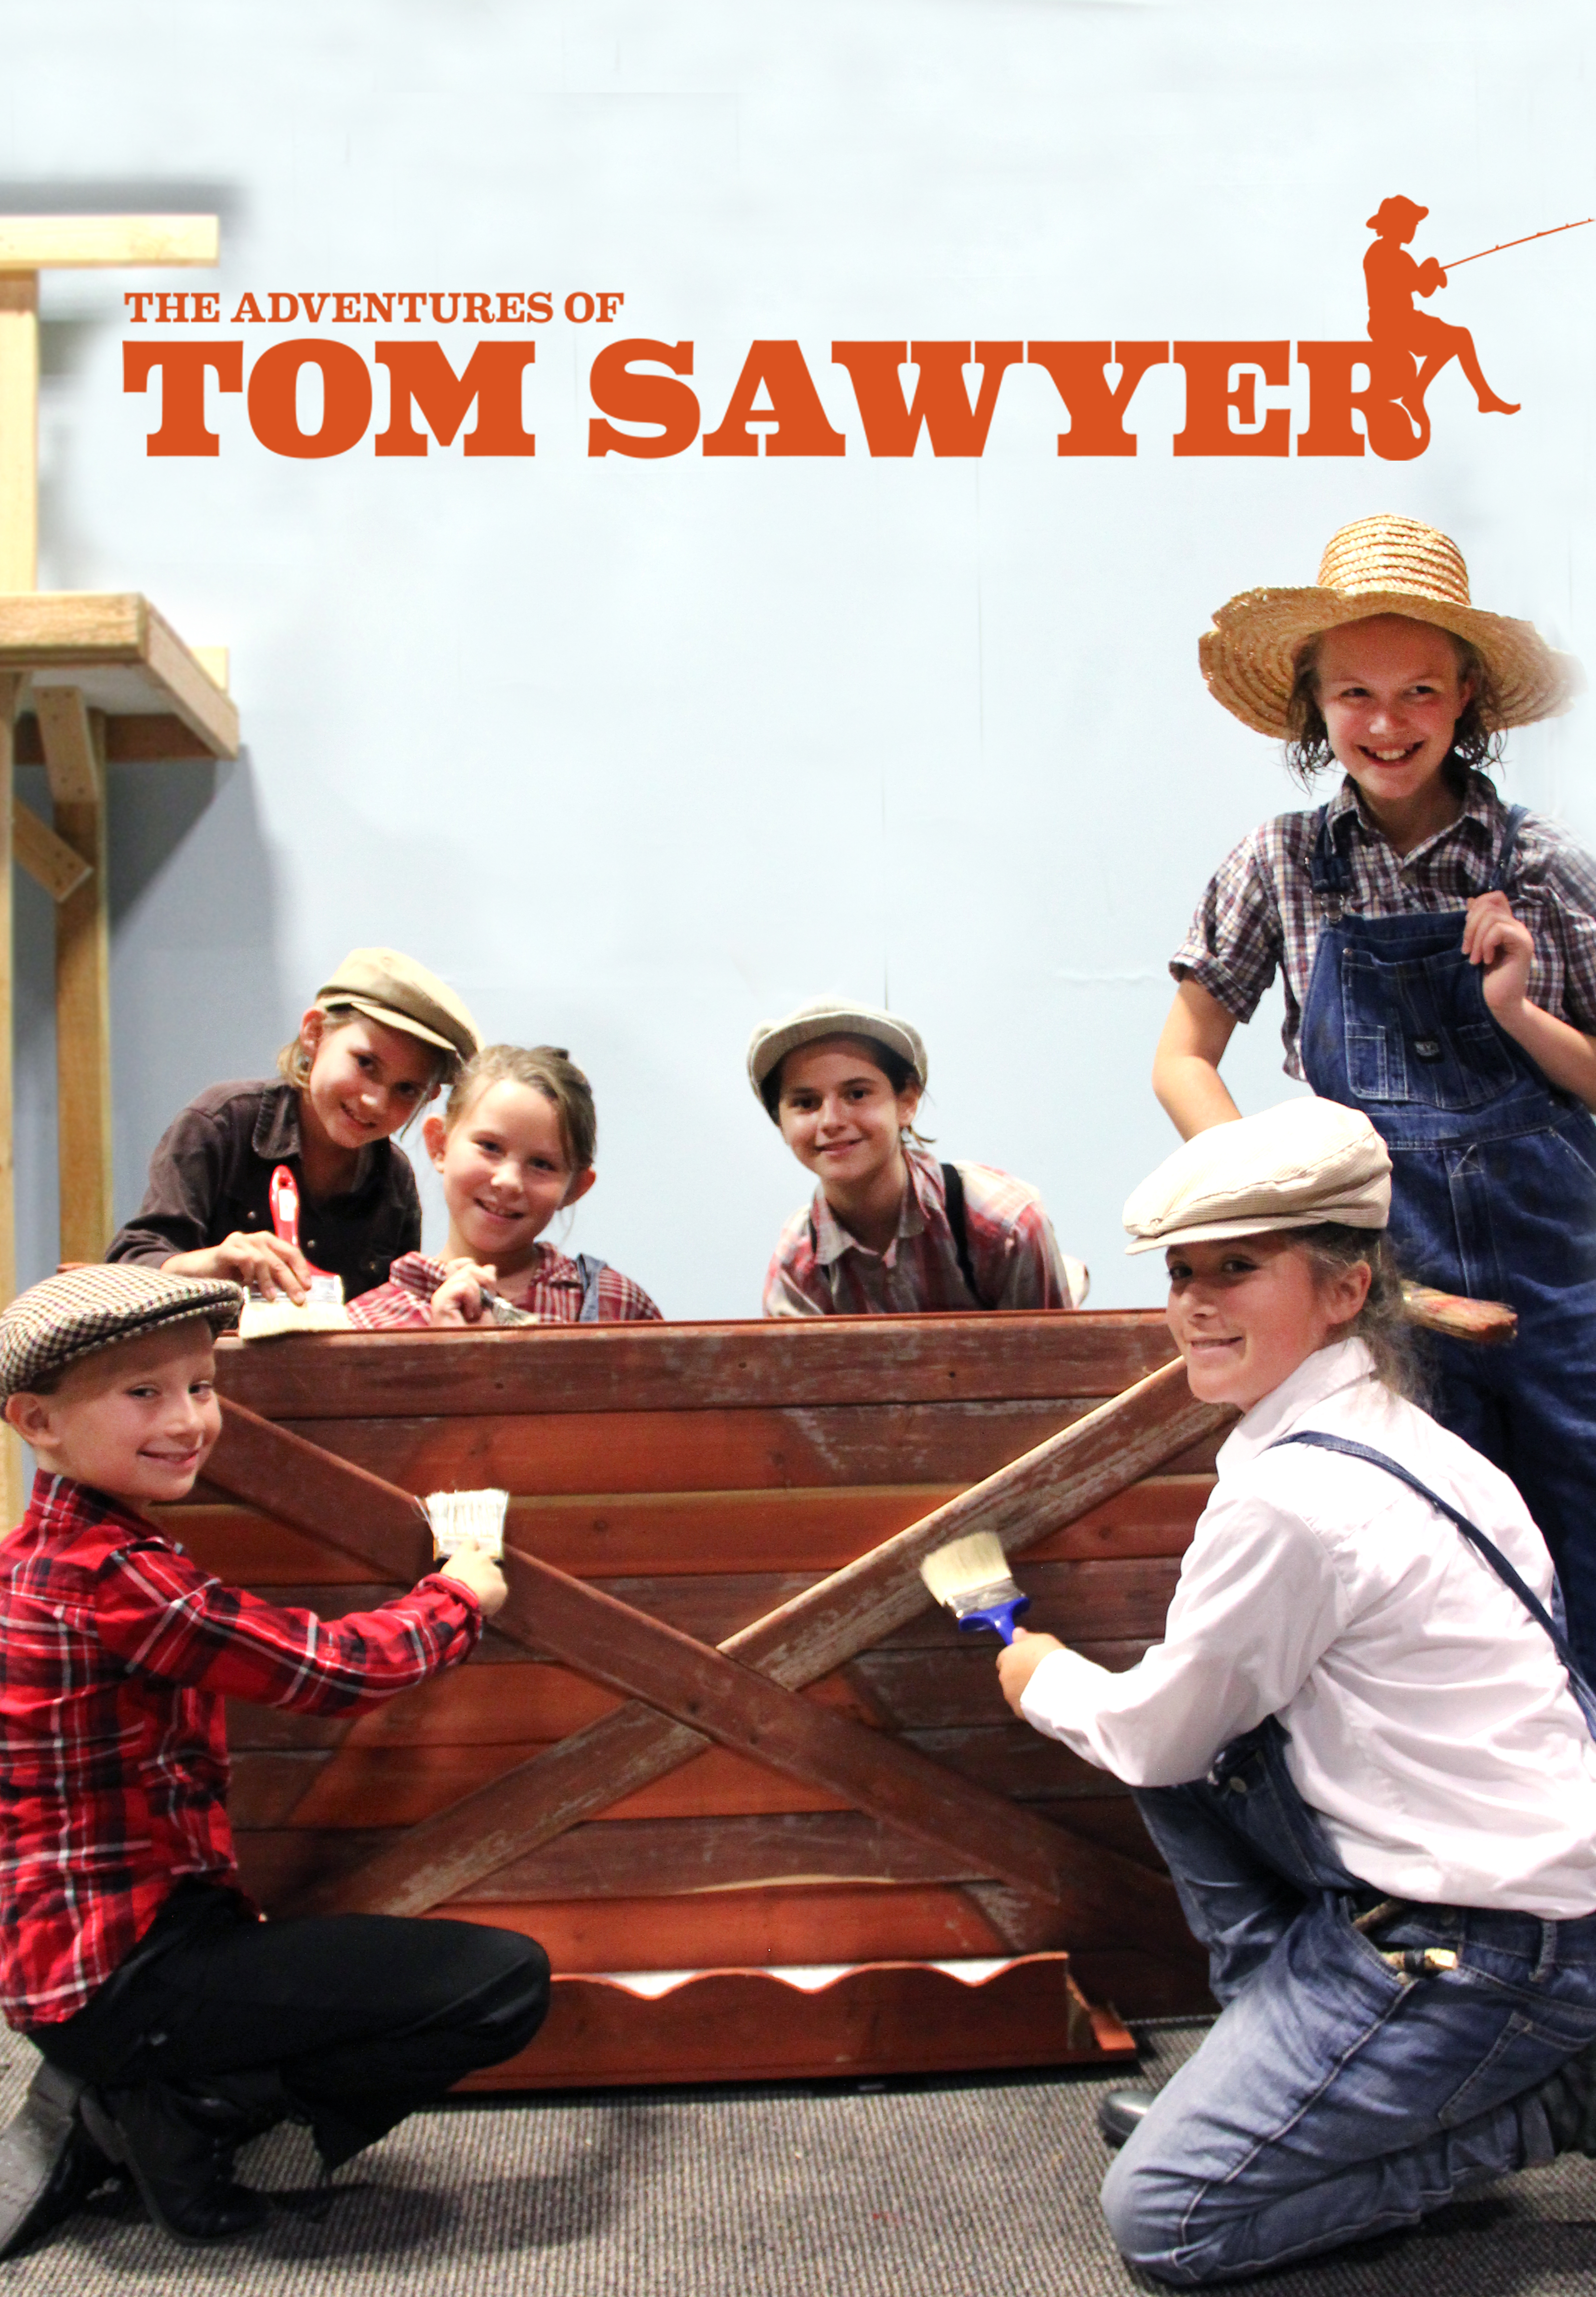 tom sawyer fence painting contest